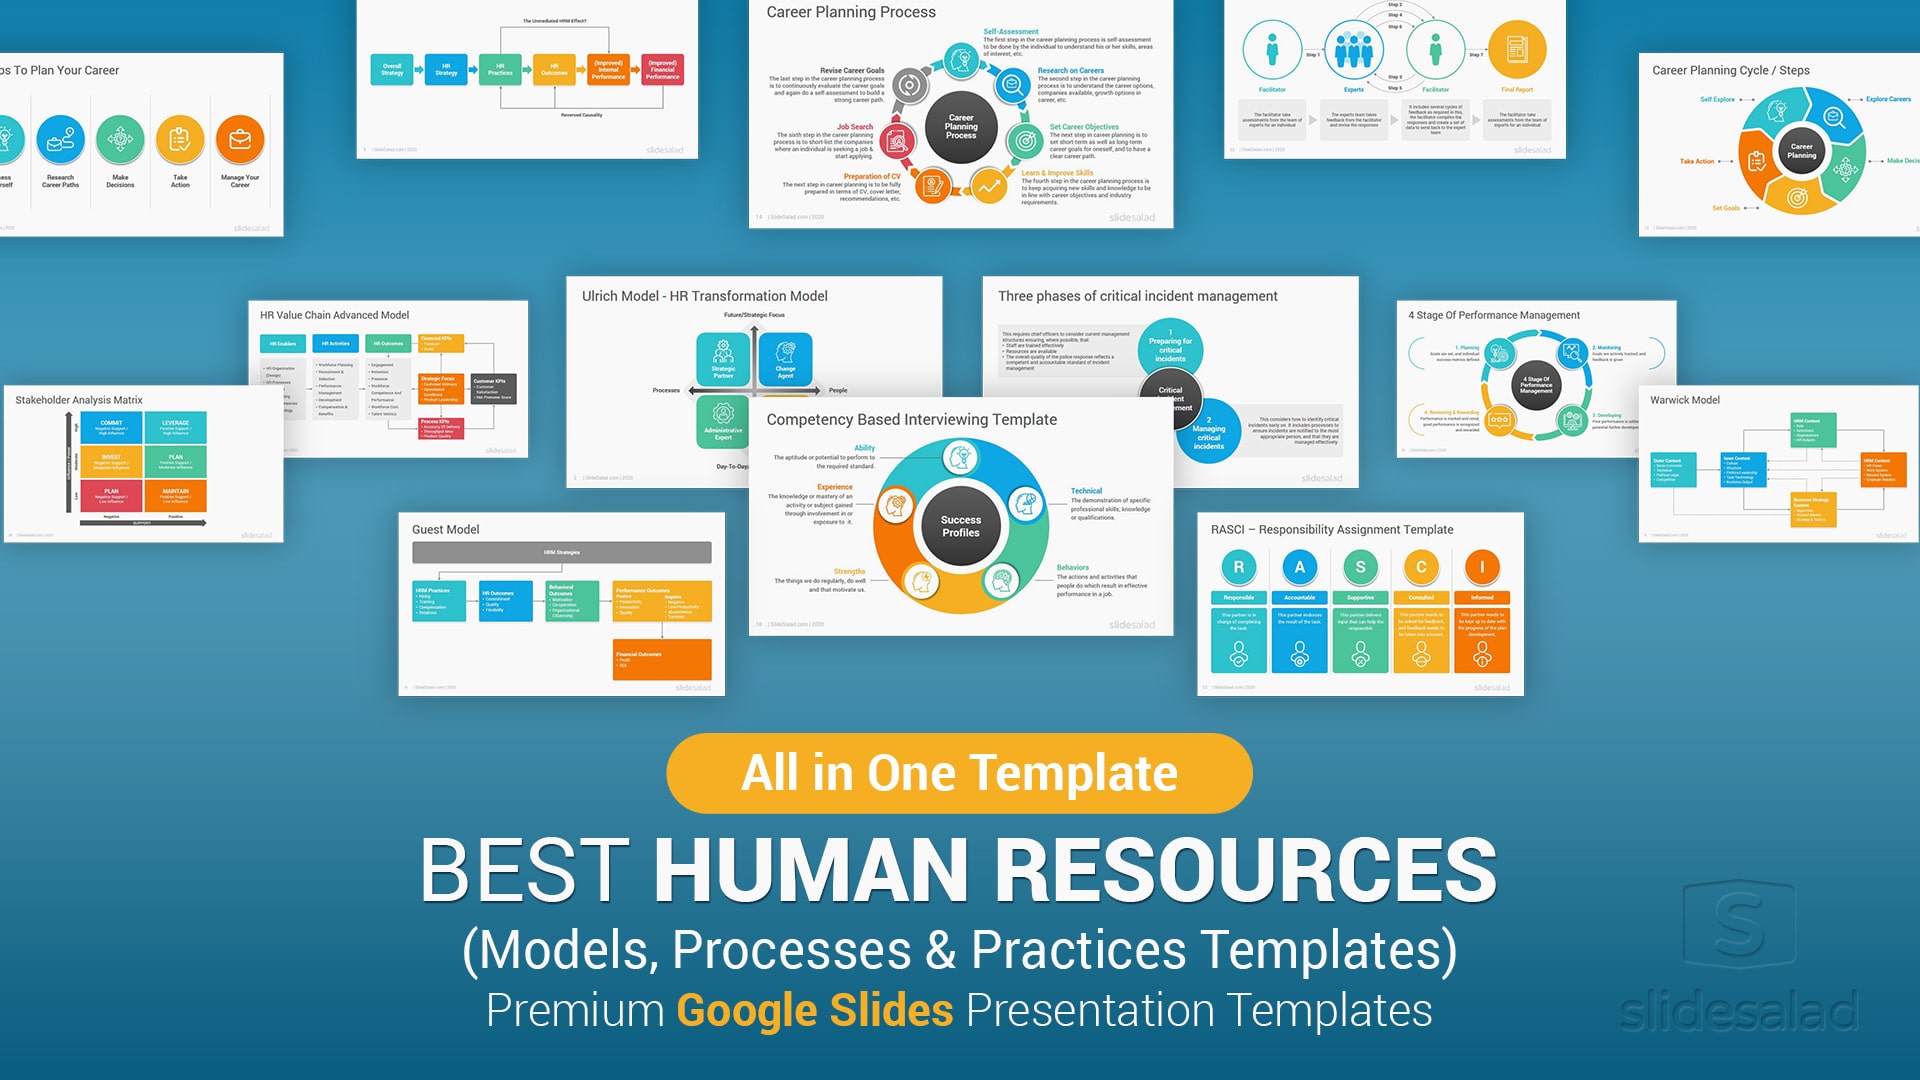 Best Human Resources Models and Practices Google Slides Templates